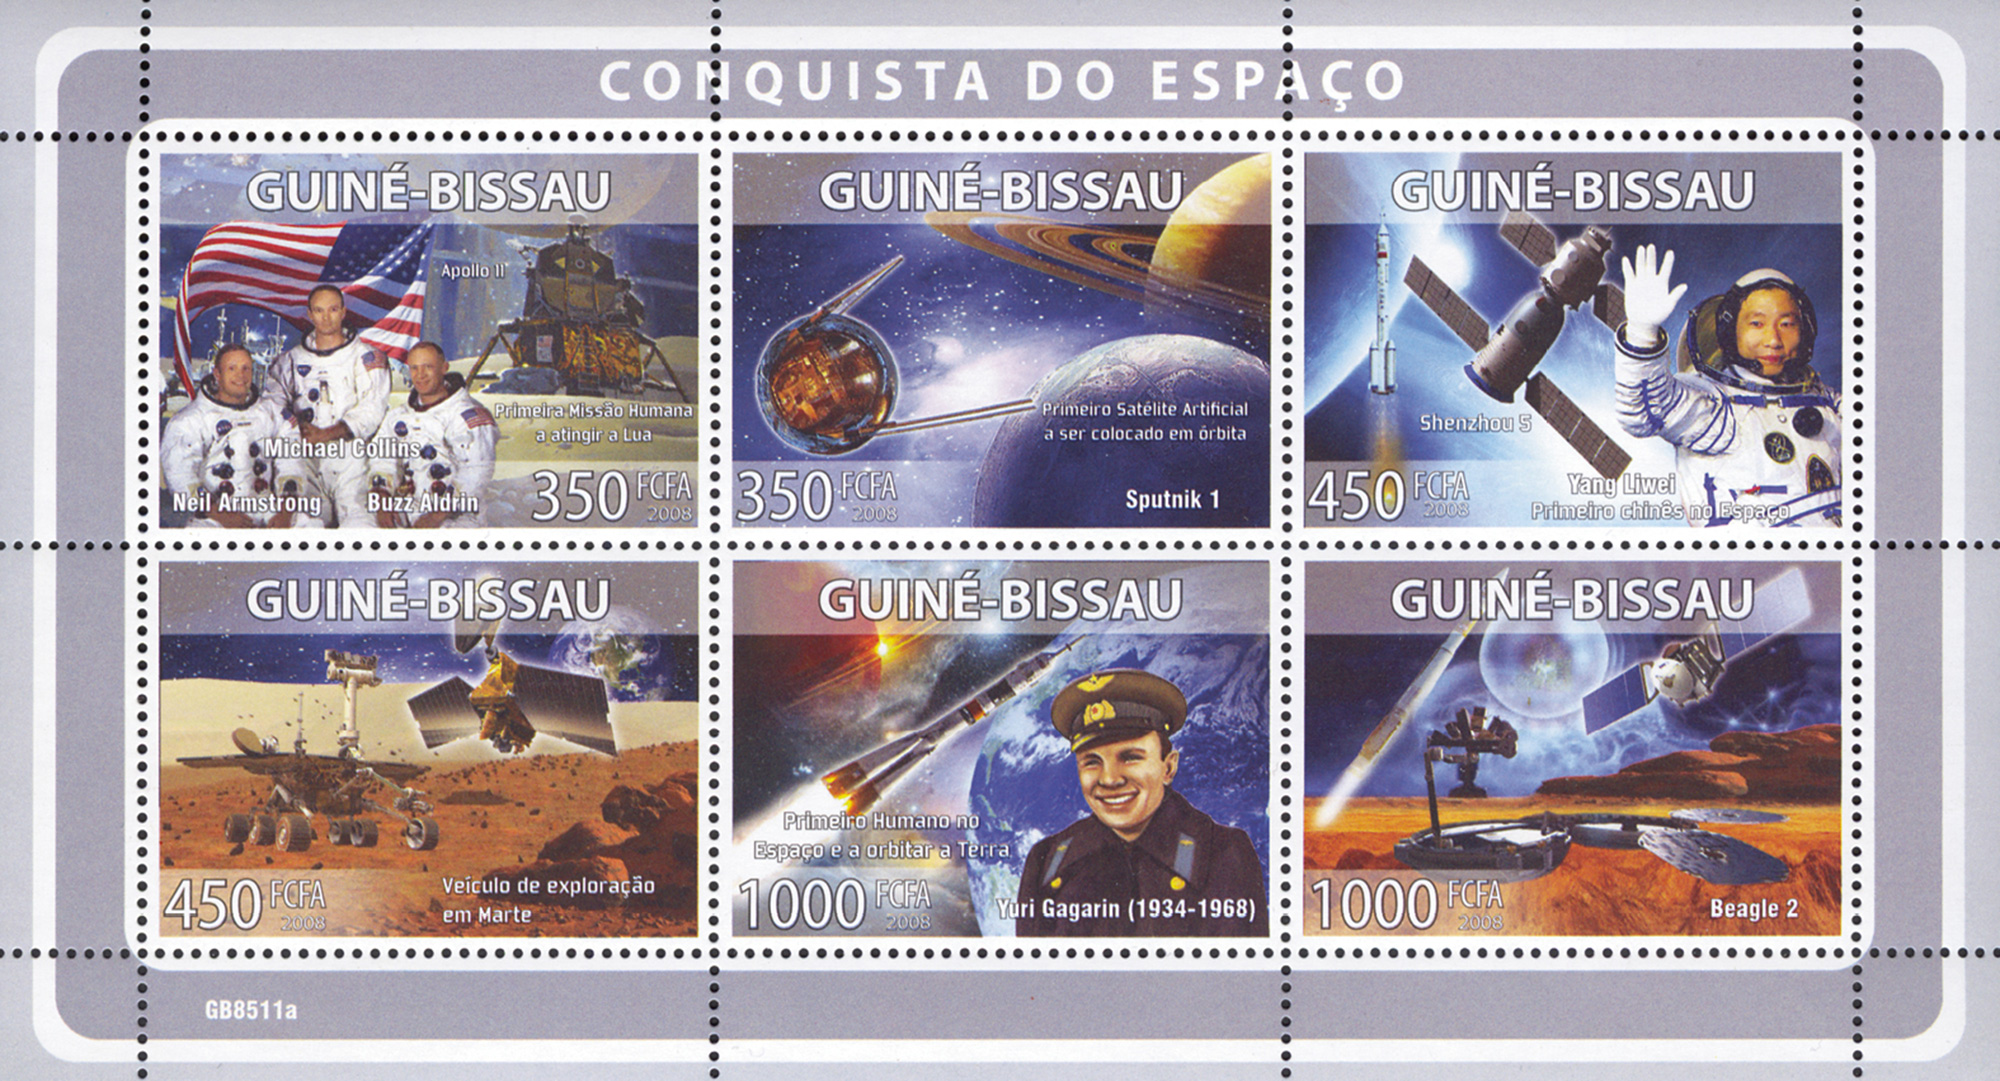 2008 Guinea-Bissau stamps celebrating the conquest of space ... by others.